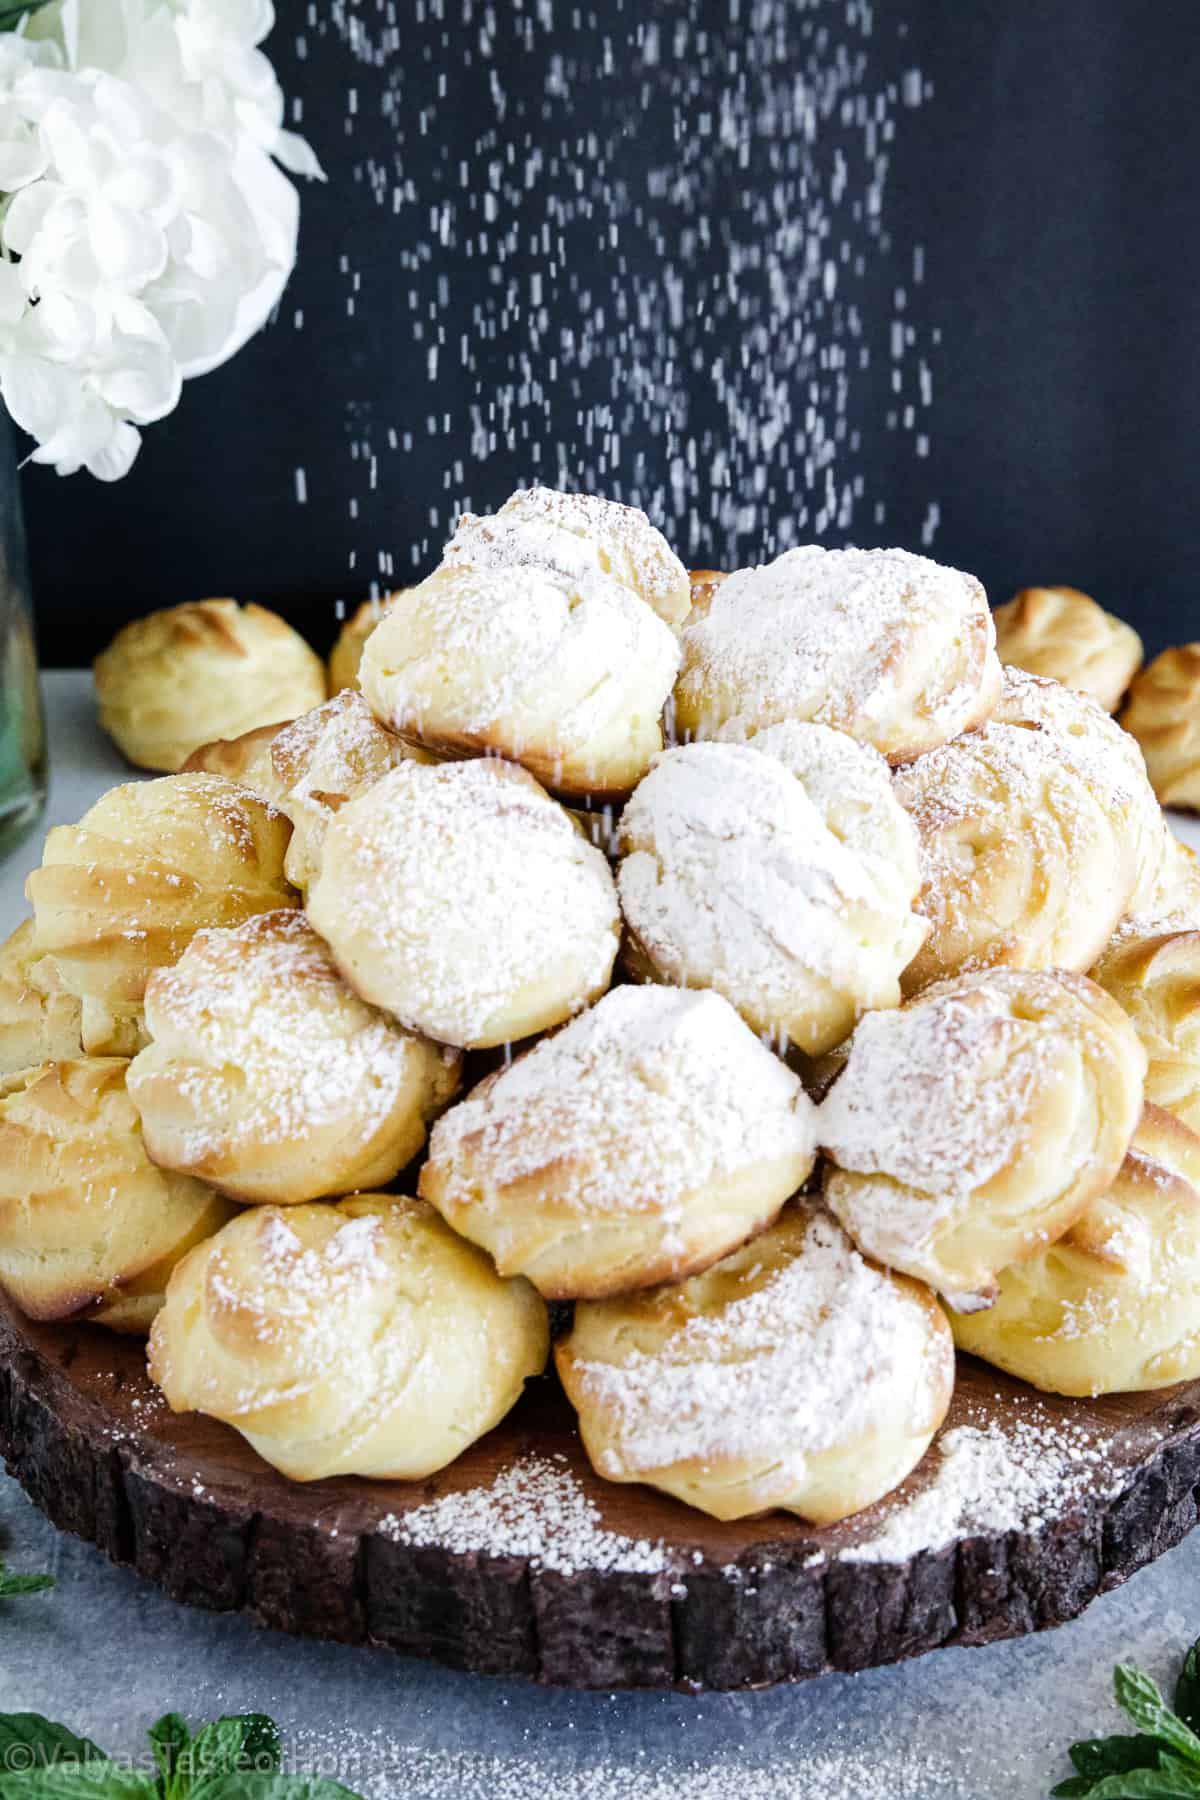 These Cream Puffs are light and crisp with the most delicious cream filling you're going to absolutely love! It's a foolproof, easy recipe with classic flavors.